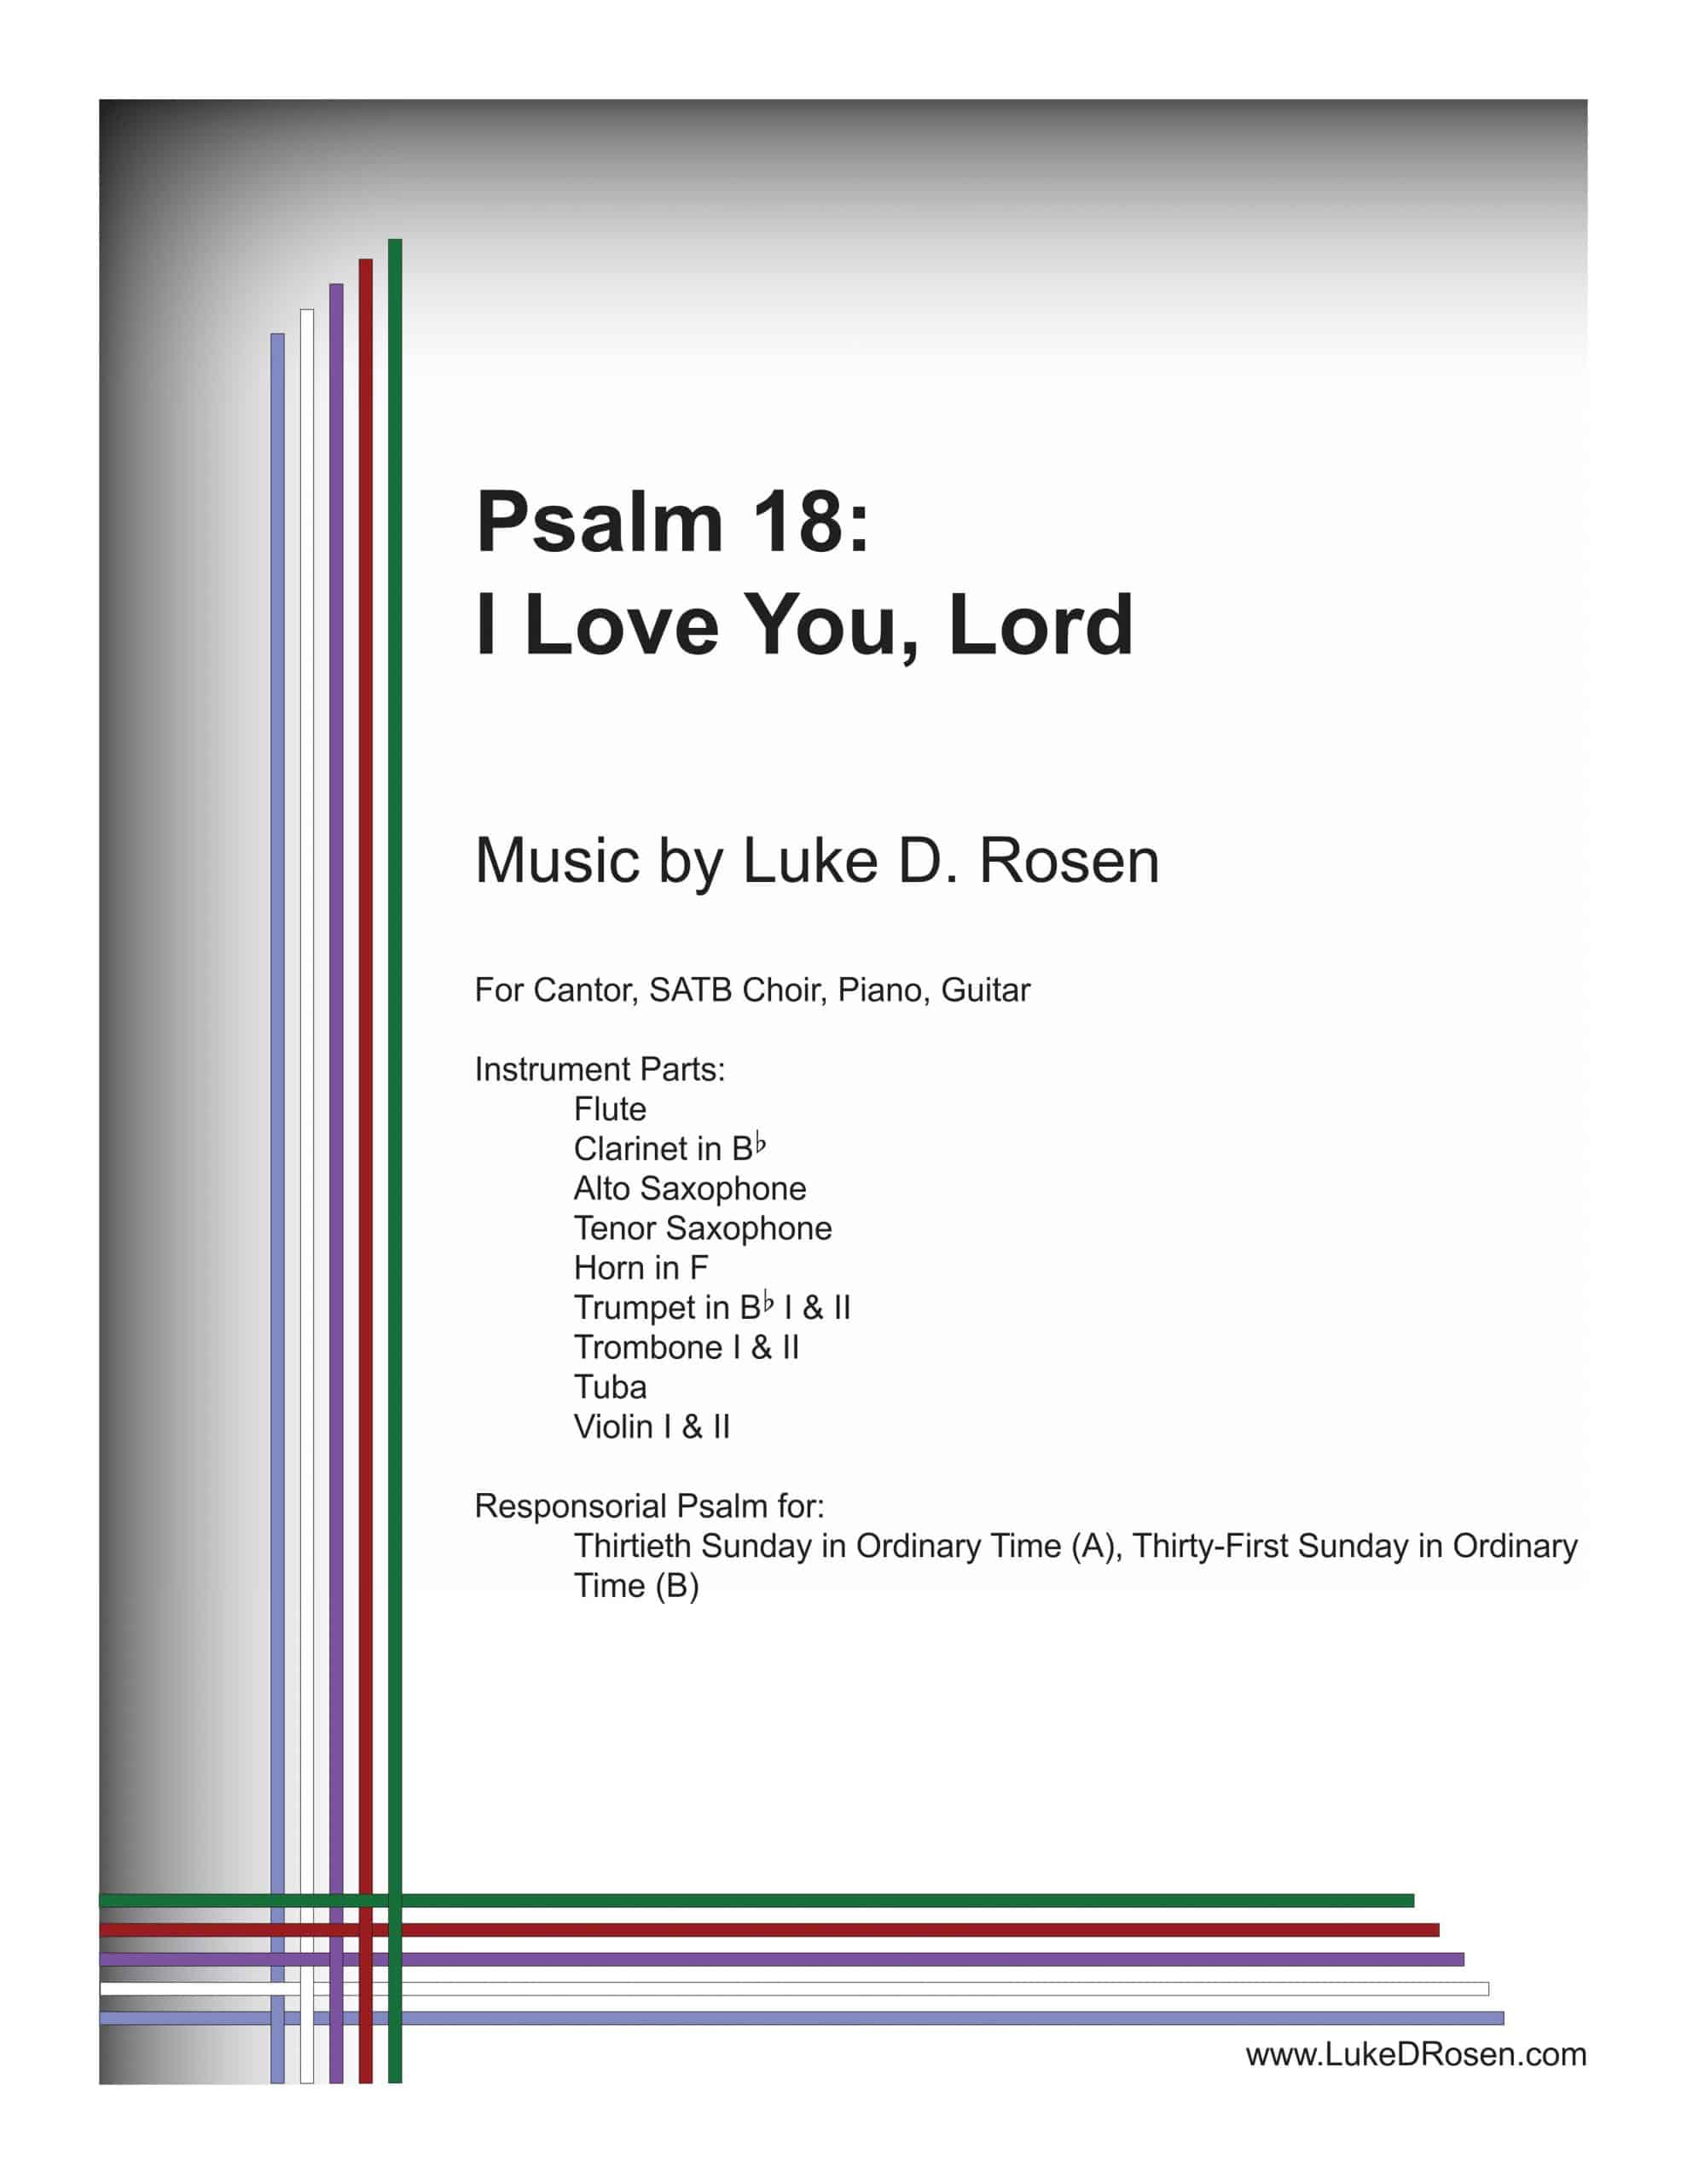 Psalm 18 – I Love You, Lord (Rosen)